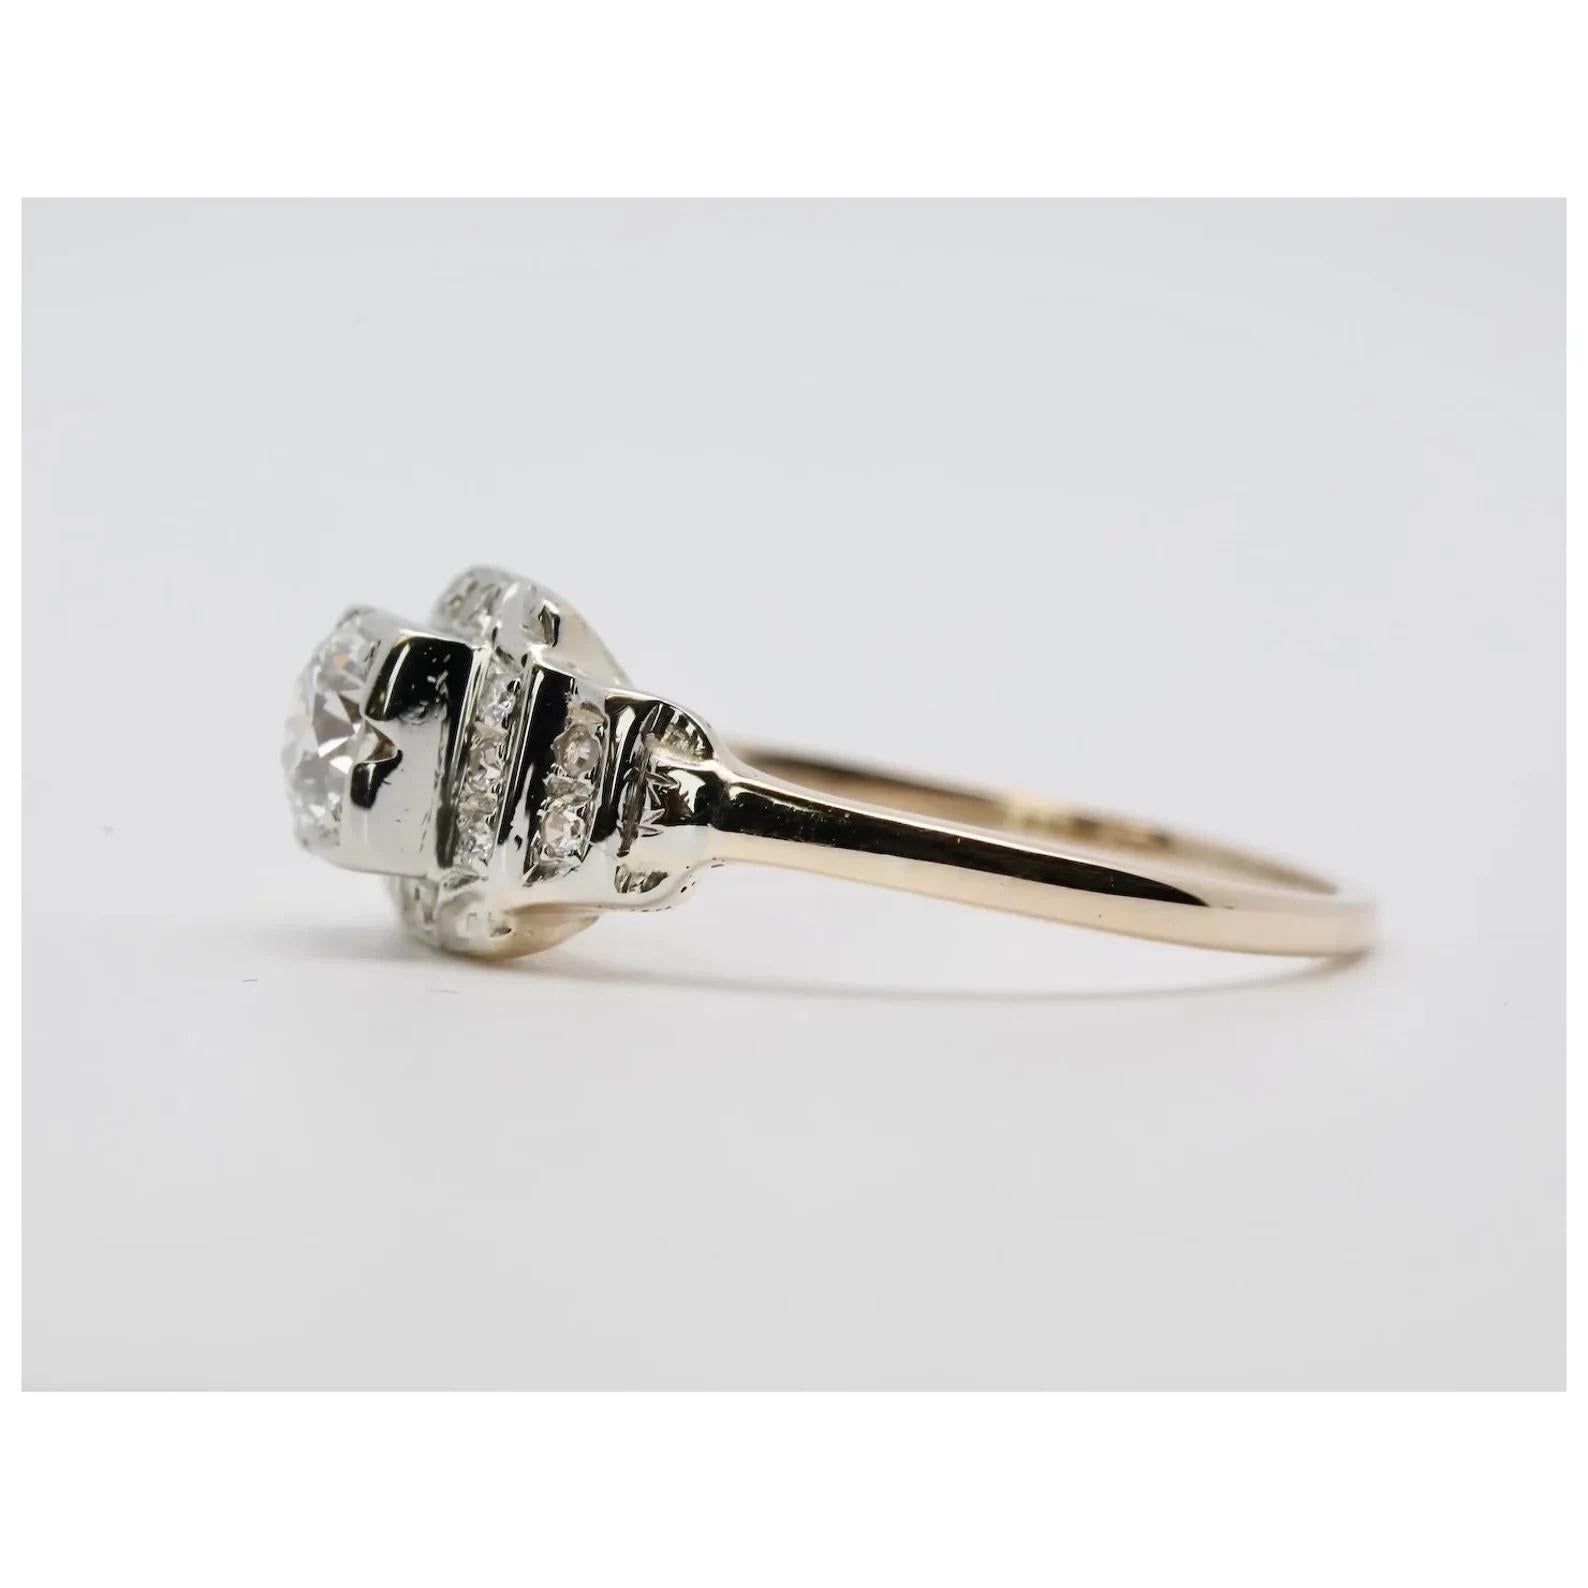 A late Art Deco period stepped style diamond engagement ring. Crafted in two tone 14 karat white, and yellow gold this ring is centered by a European cut diamond accented by Pave set diamonds. The center diamond weighs 0.50 carats and grades as H